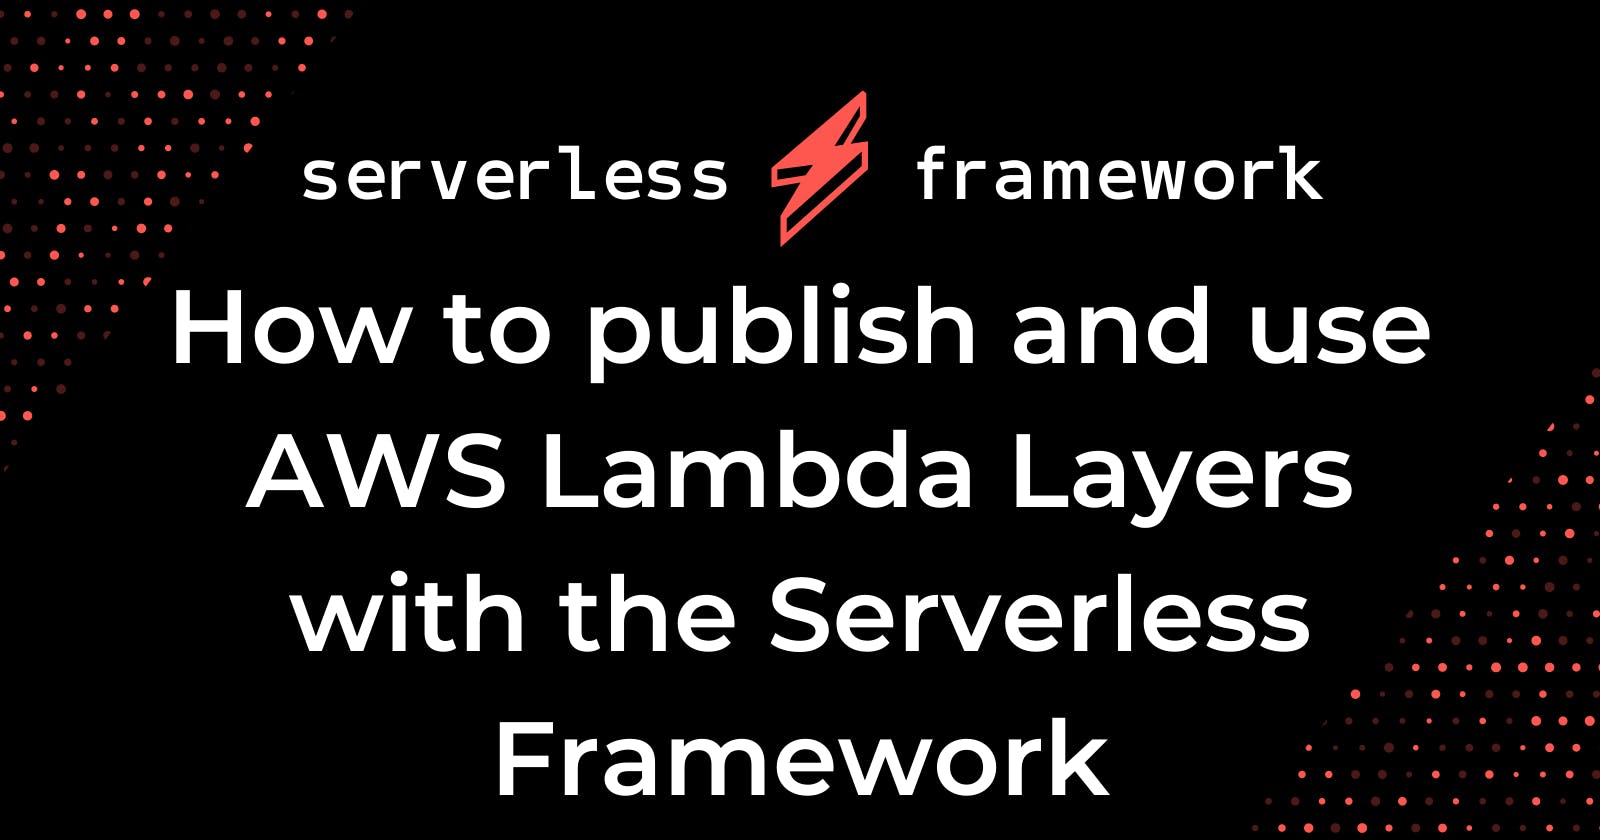 How to publish and use AWS Lambda Layers with the Serverless Framework